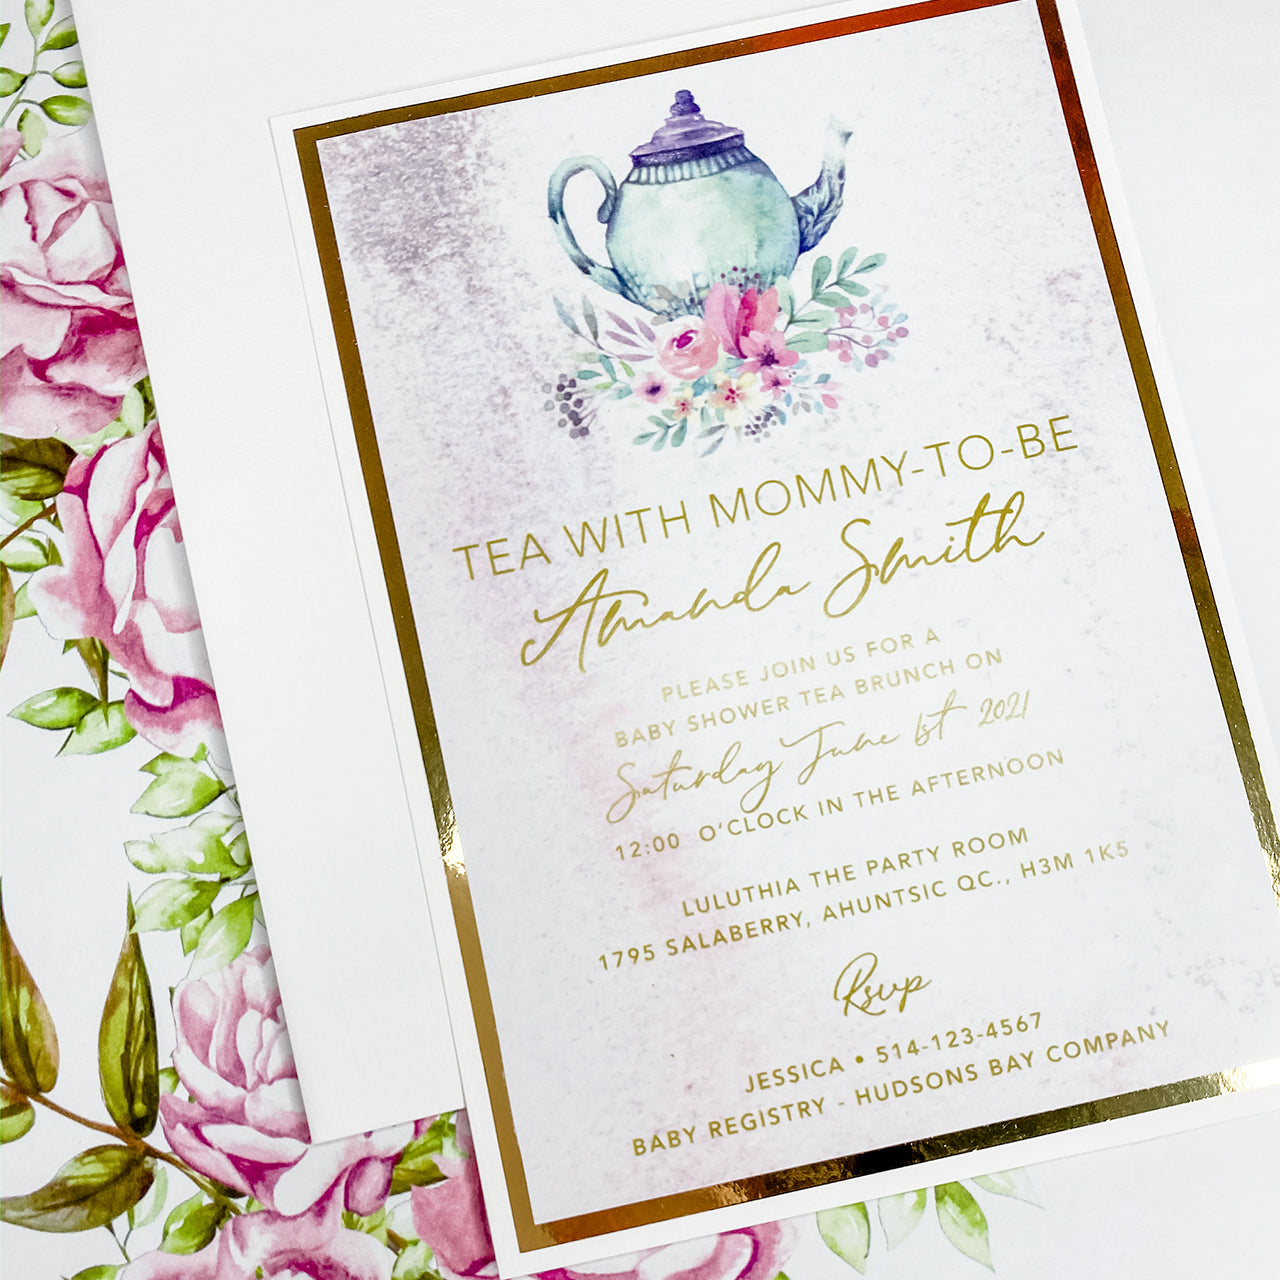 TEA WITH MOMMY-TO-BE INVITATION CARD